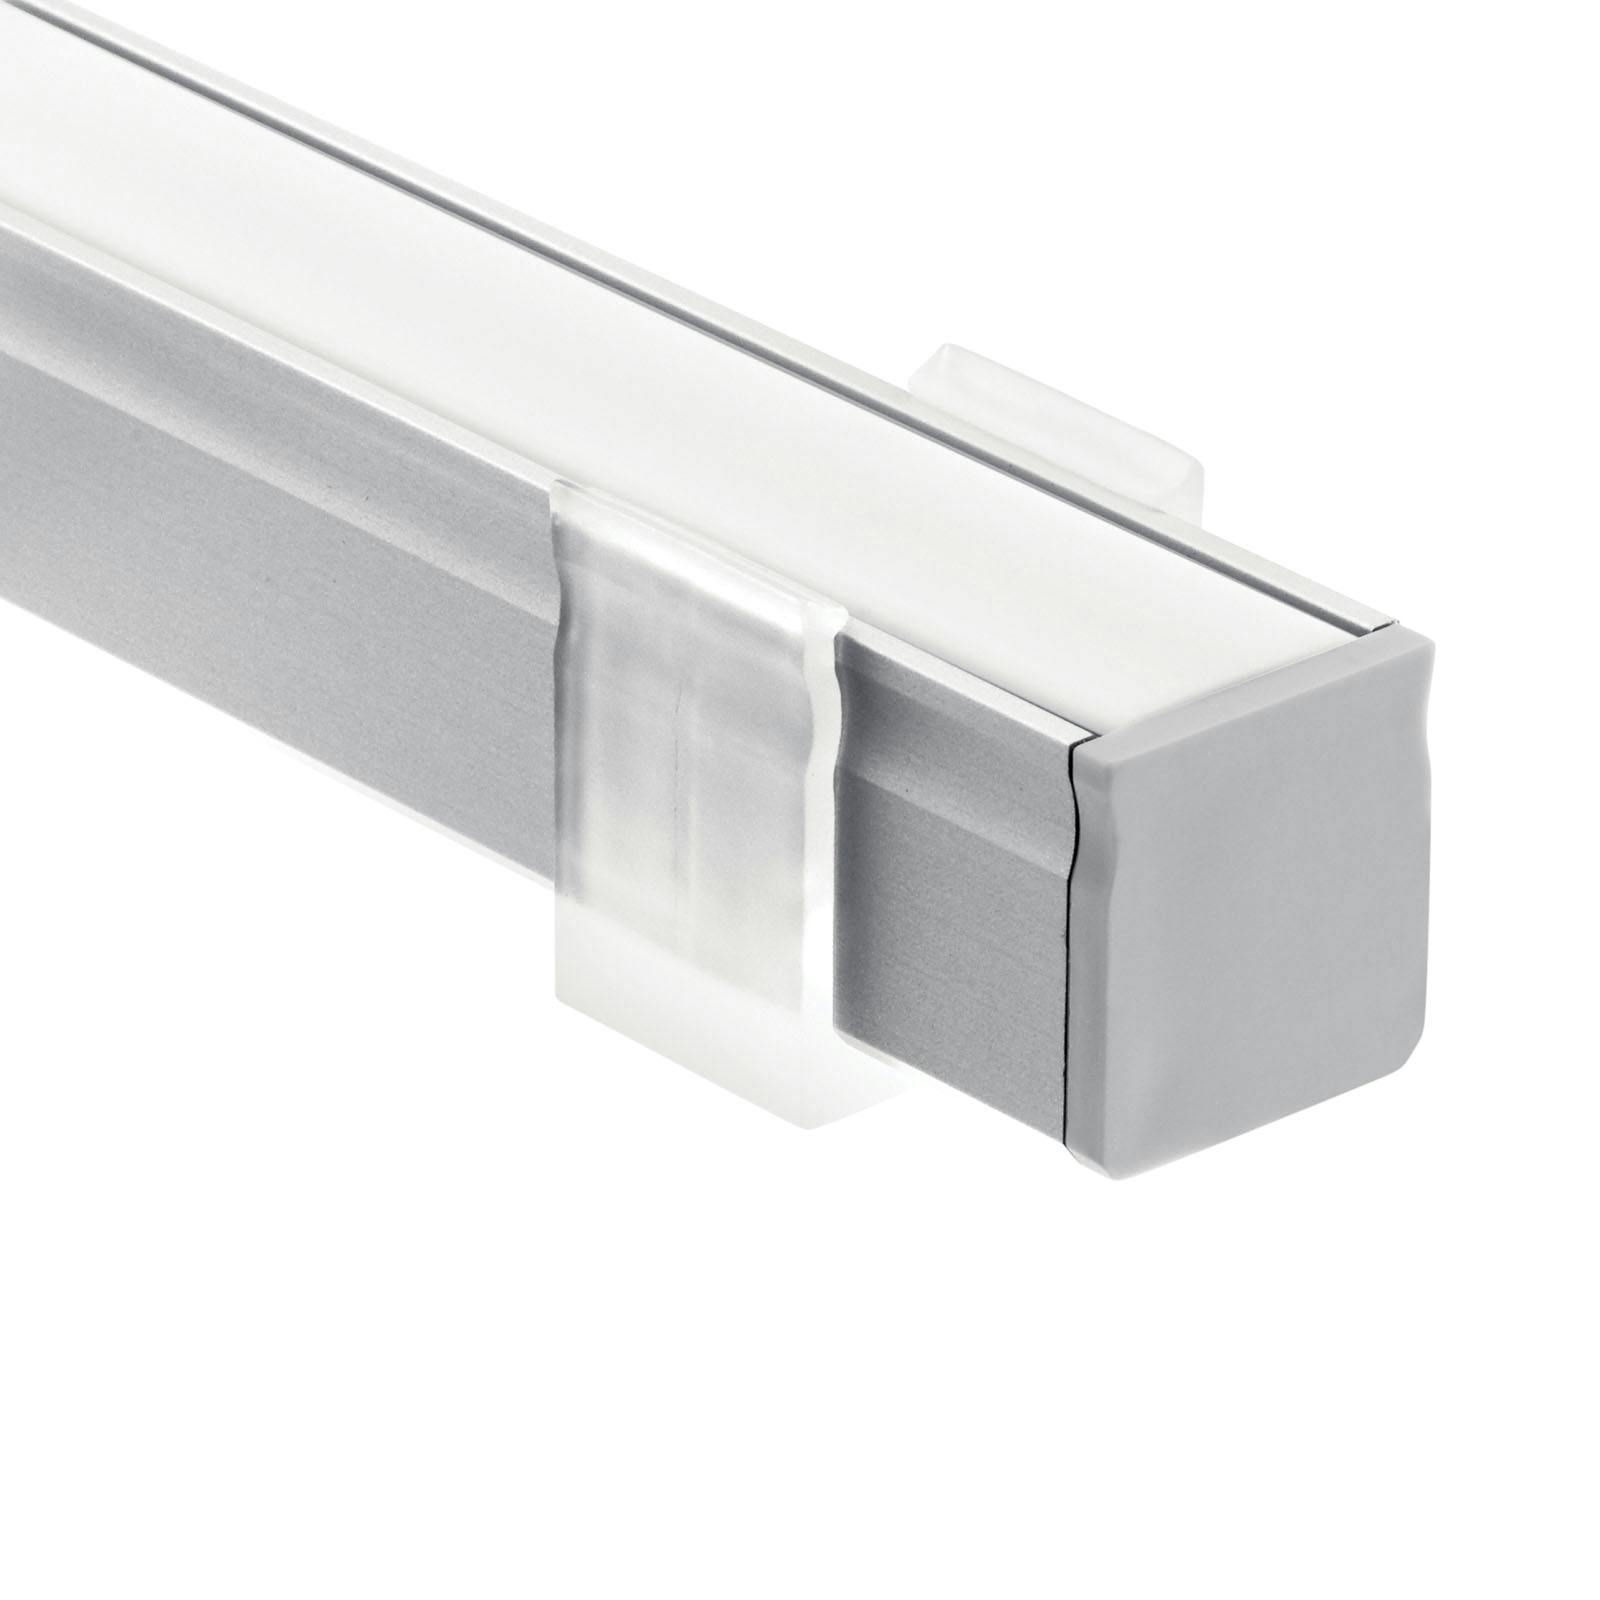 2' Kit Deep Well Surface Channel Silver on a white background